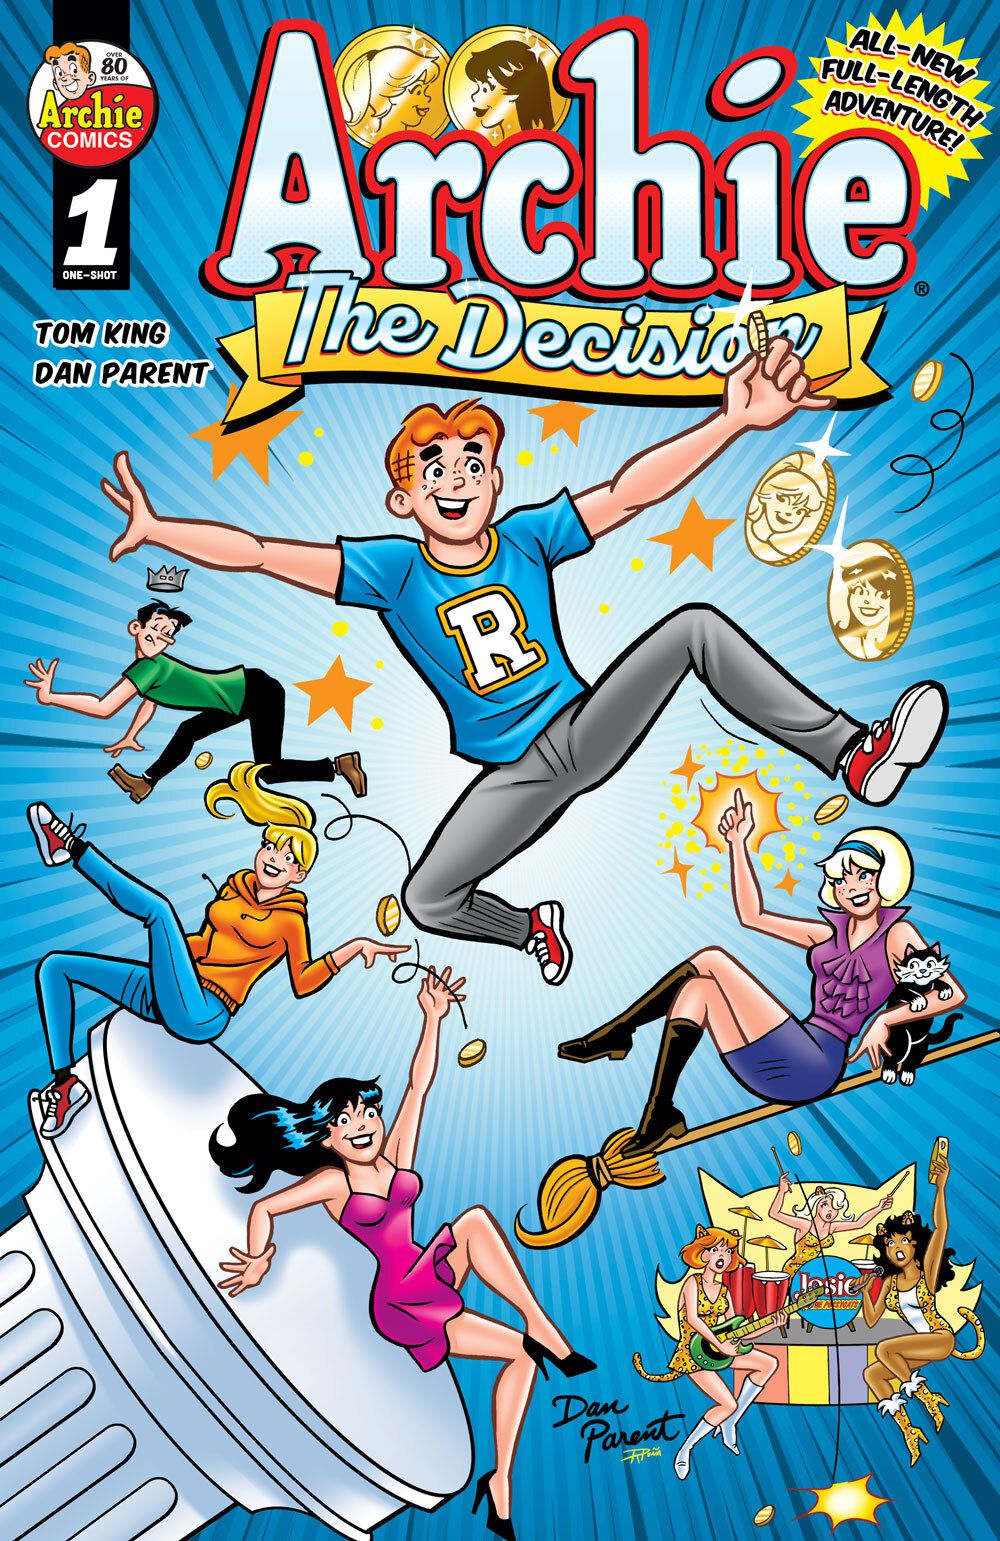 One cover of Archie: The Decision, a comedy oneshot written by Tom King and Dan Parent